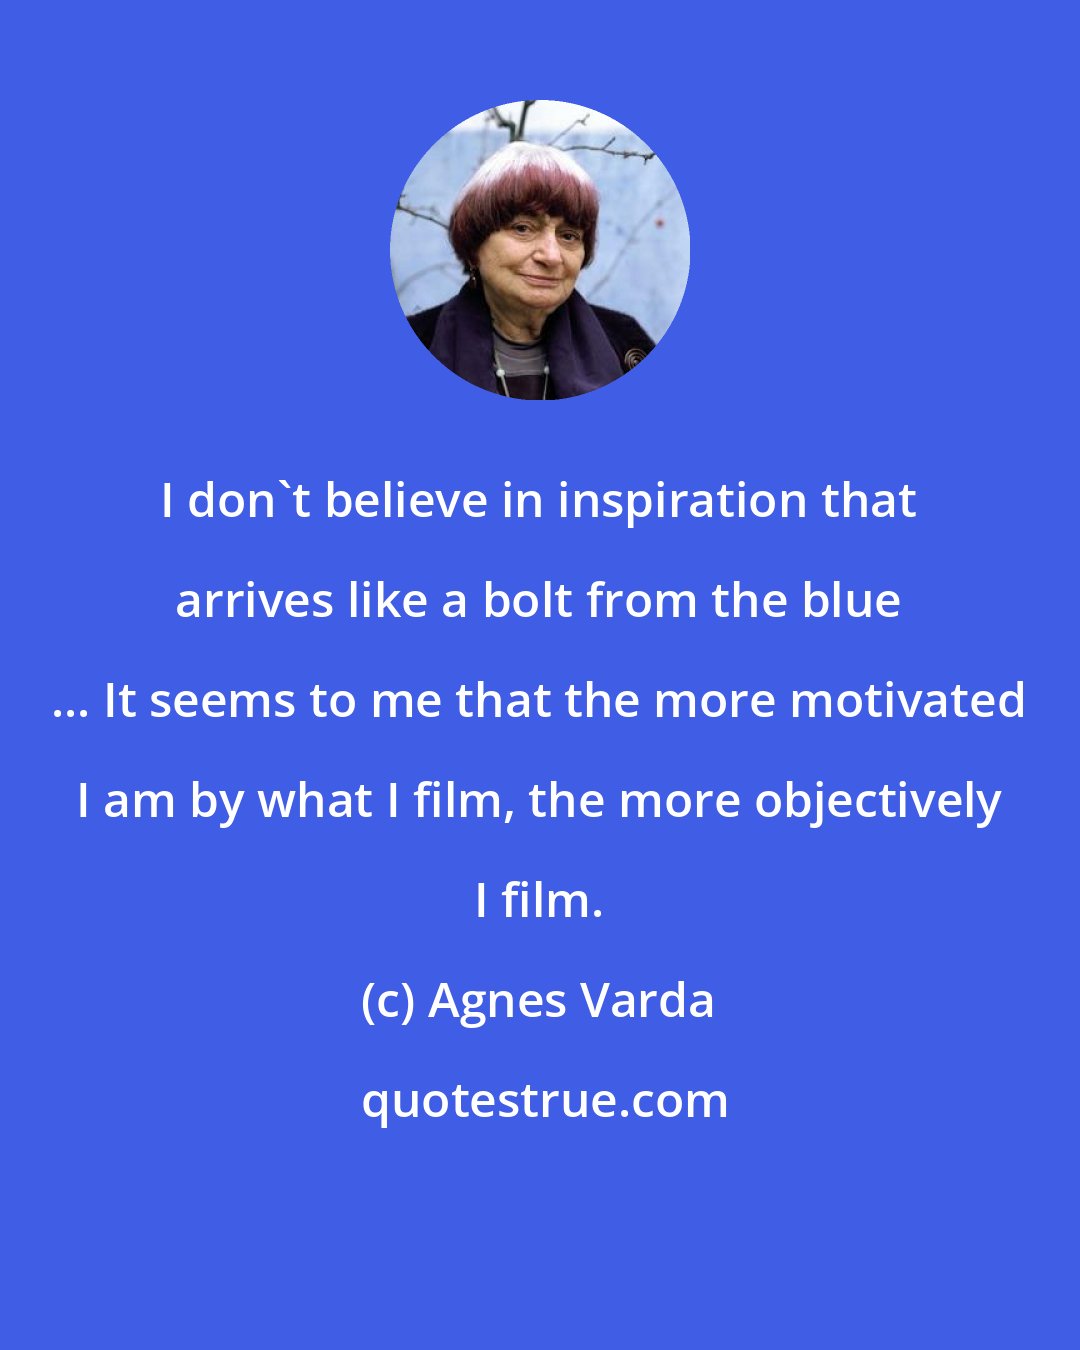 Agnes Varda: I don't believe in inspiration that arrives like a bolt from the blue ... It seems to me that the more motivated I am by what I film, the more objectively I film.